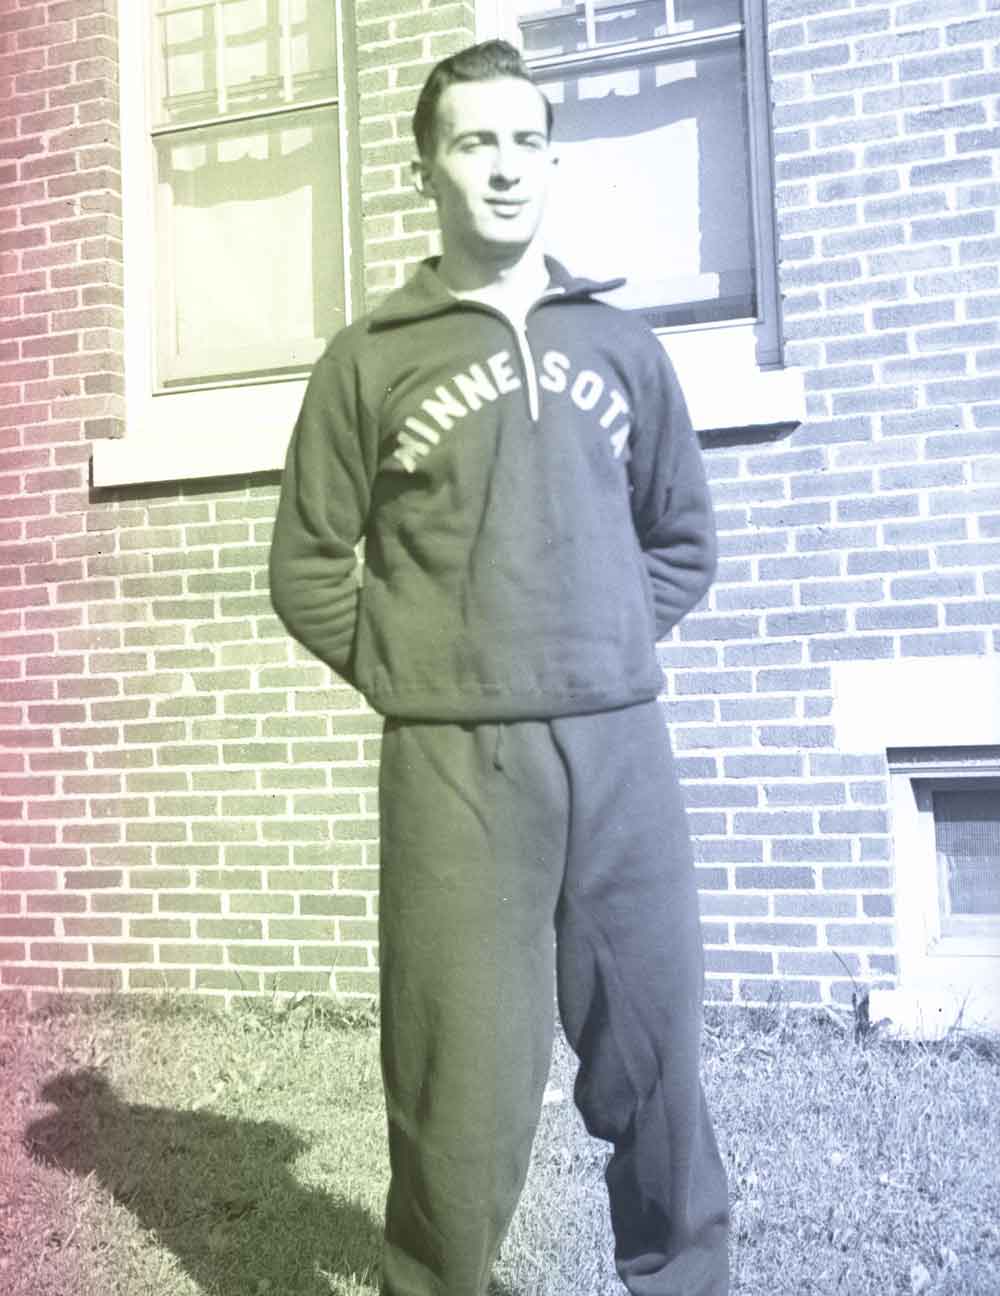 Arthur Buchman attended the University of Minnesota before enlisting in the U.S. Army in 1941. Buchman Family Photographs, Rauh Jewish Archives at the History Center.